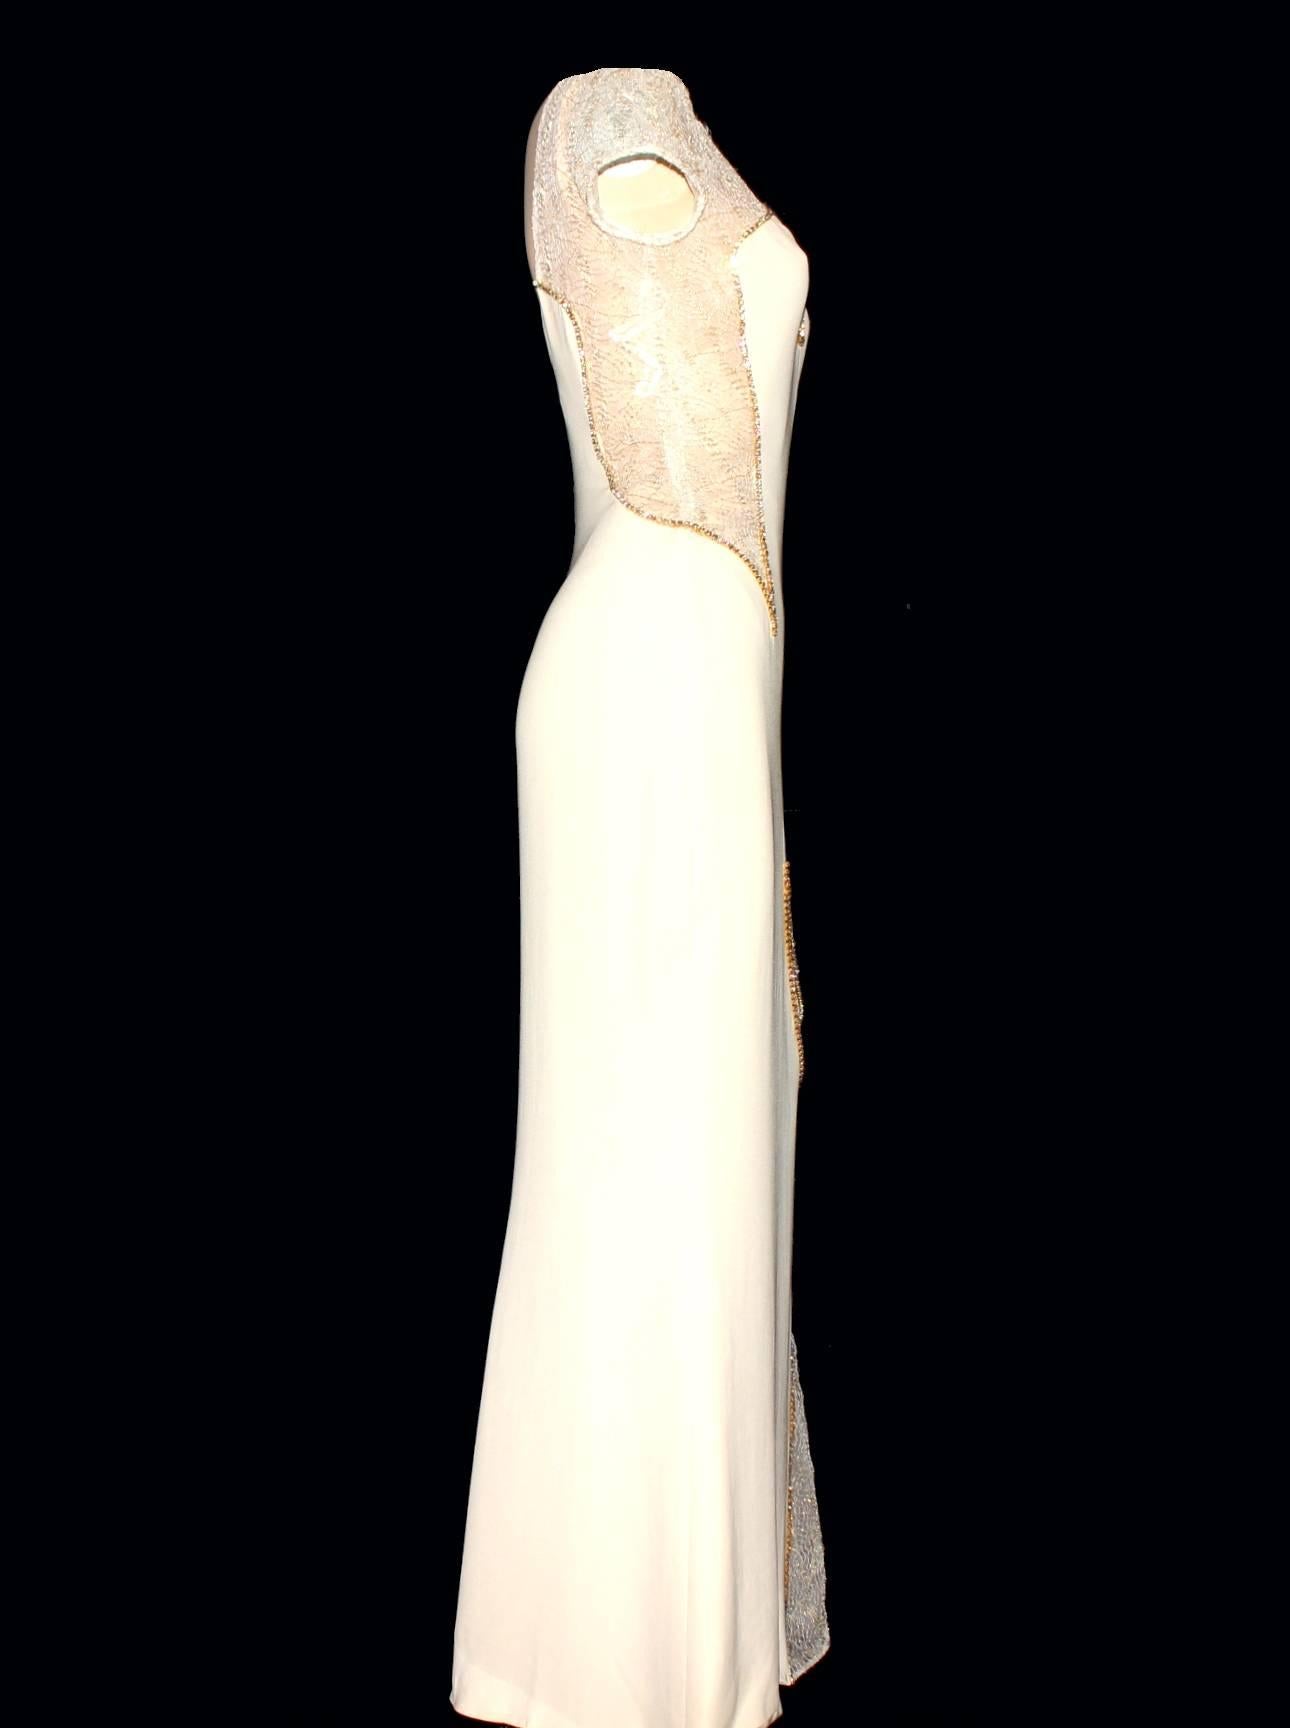 Unique Gianni Versace Couture Evening Gown
Stunning piece 
From the SS 1998 collection
A one-of piece - special order in ivory
Spider-web lace cut out details
Swarovski crystal trimming
Asymmetric design
A similar dress from the same collection is